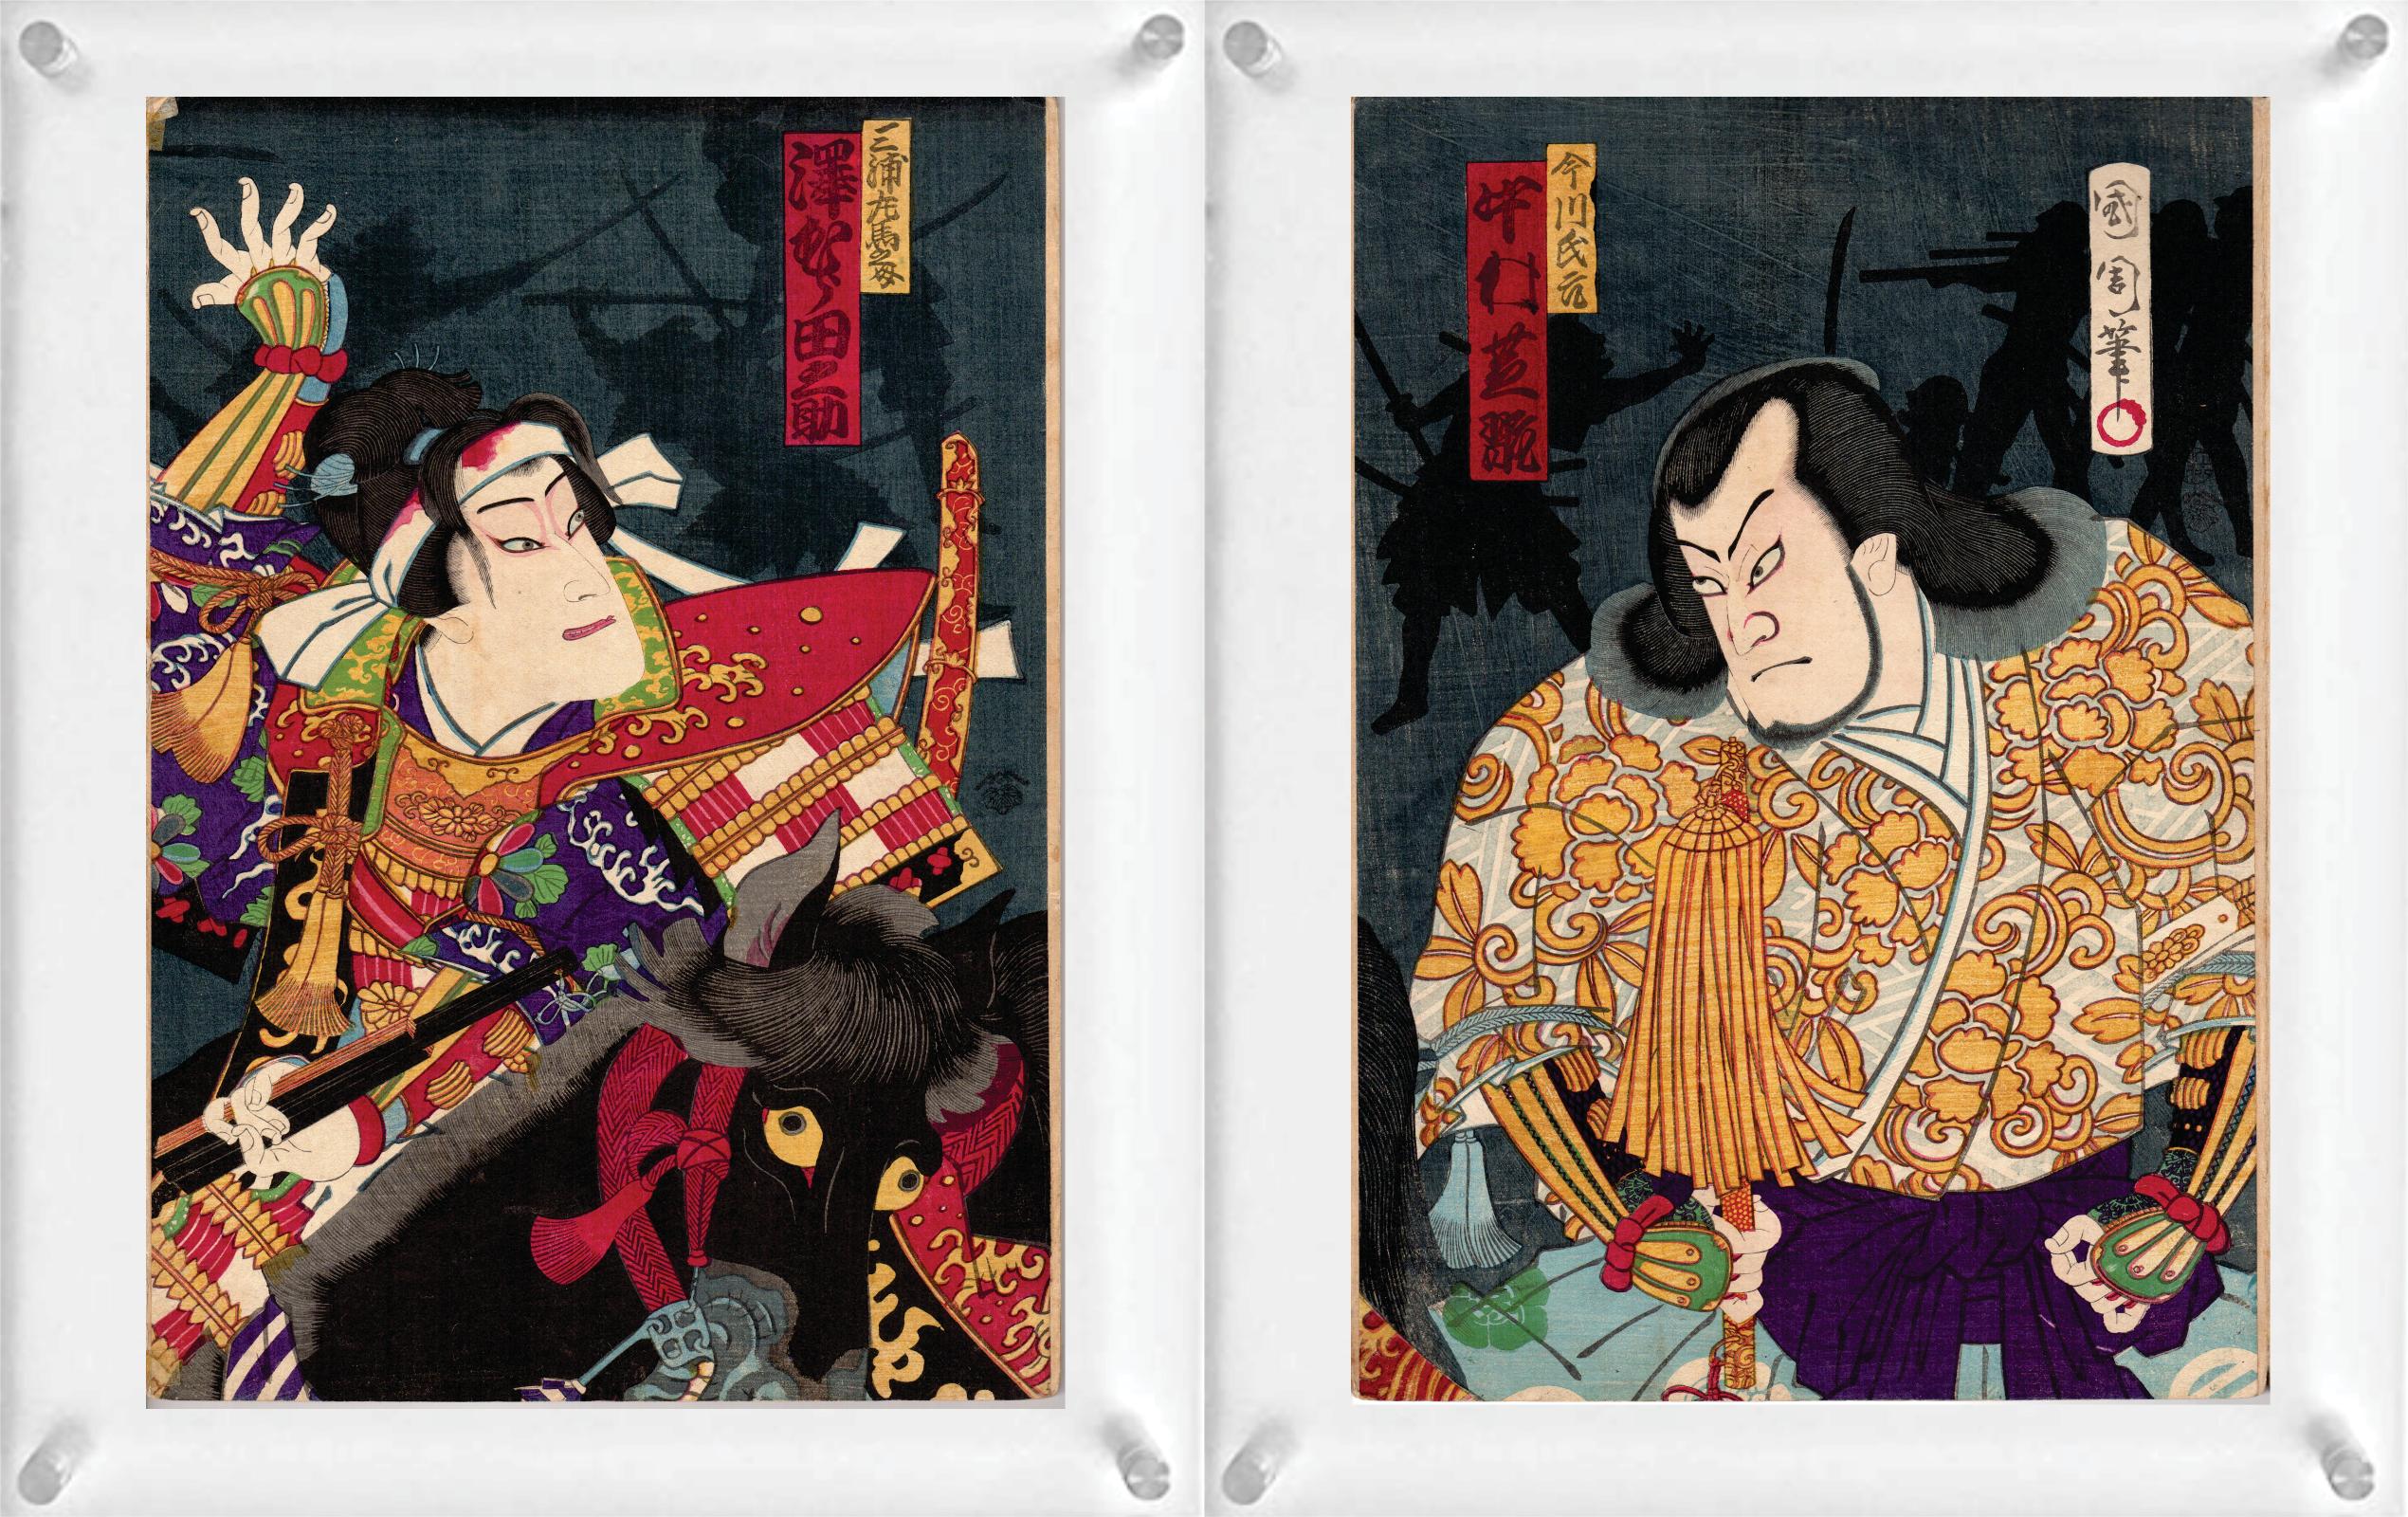 4 Japanese Woodblock Prints (Double-Side) by Toyohara Kunichika (Diptych), and Shosai Ikkei - from Thirty-Six Comics of the Famous Places of Tokyo.

Note: These are only two pieces of woodblock prints with 4 images. They are double-sided with two